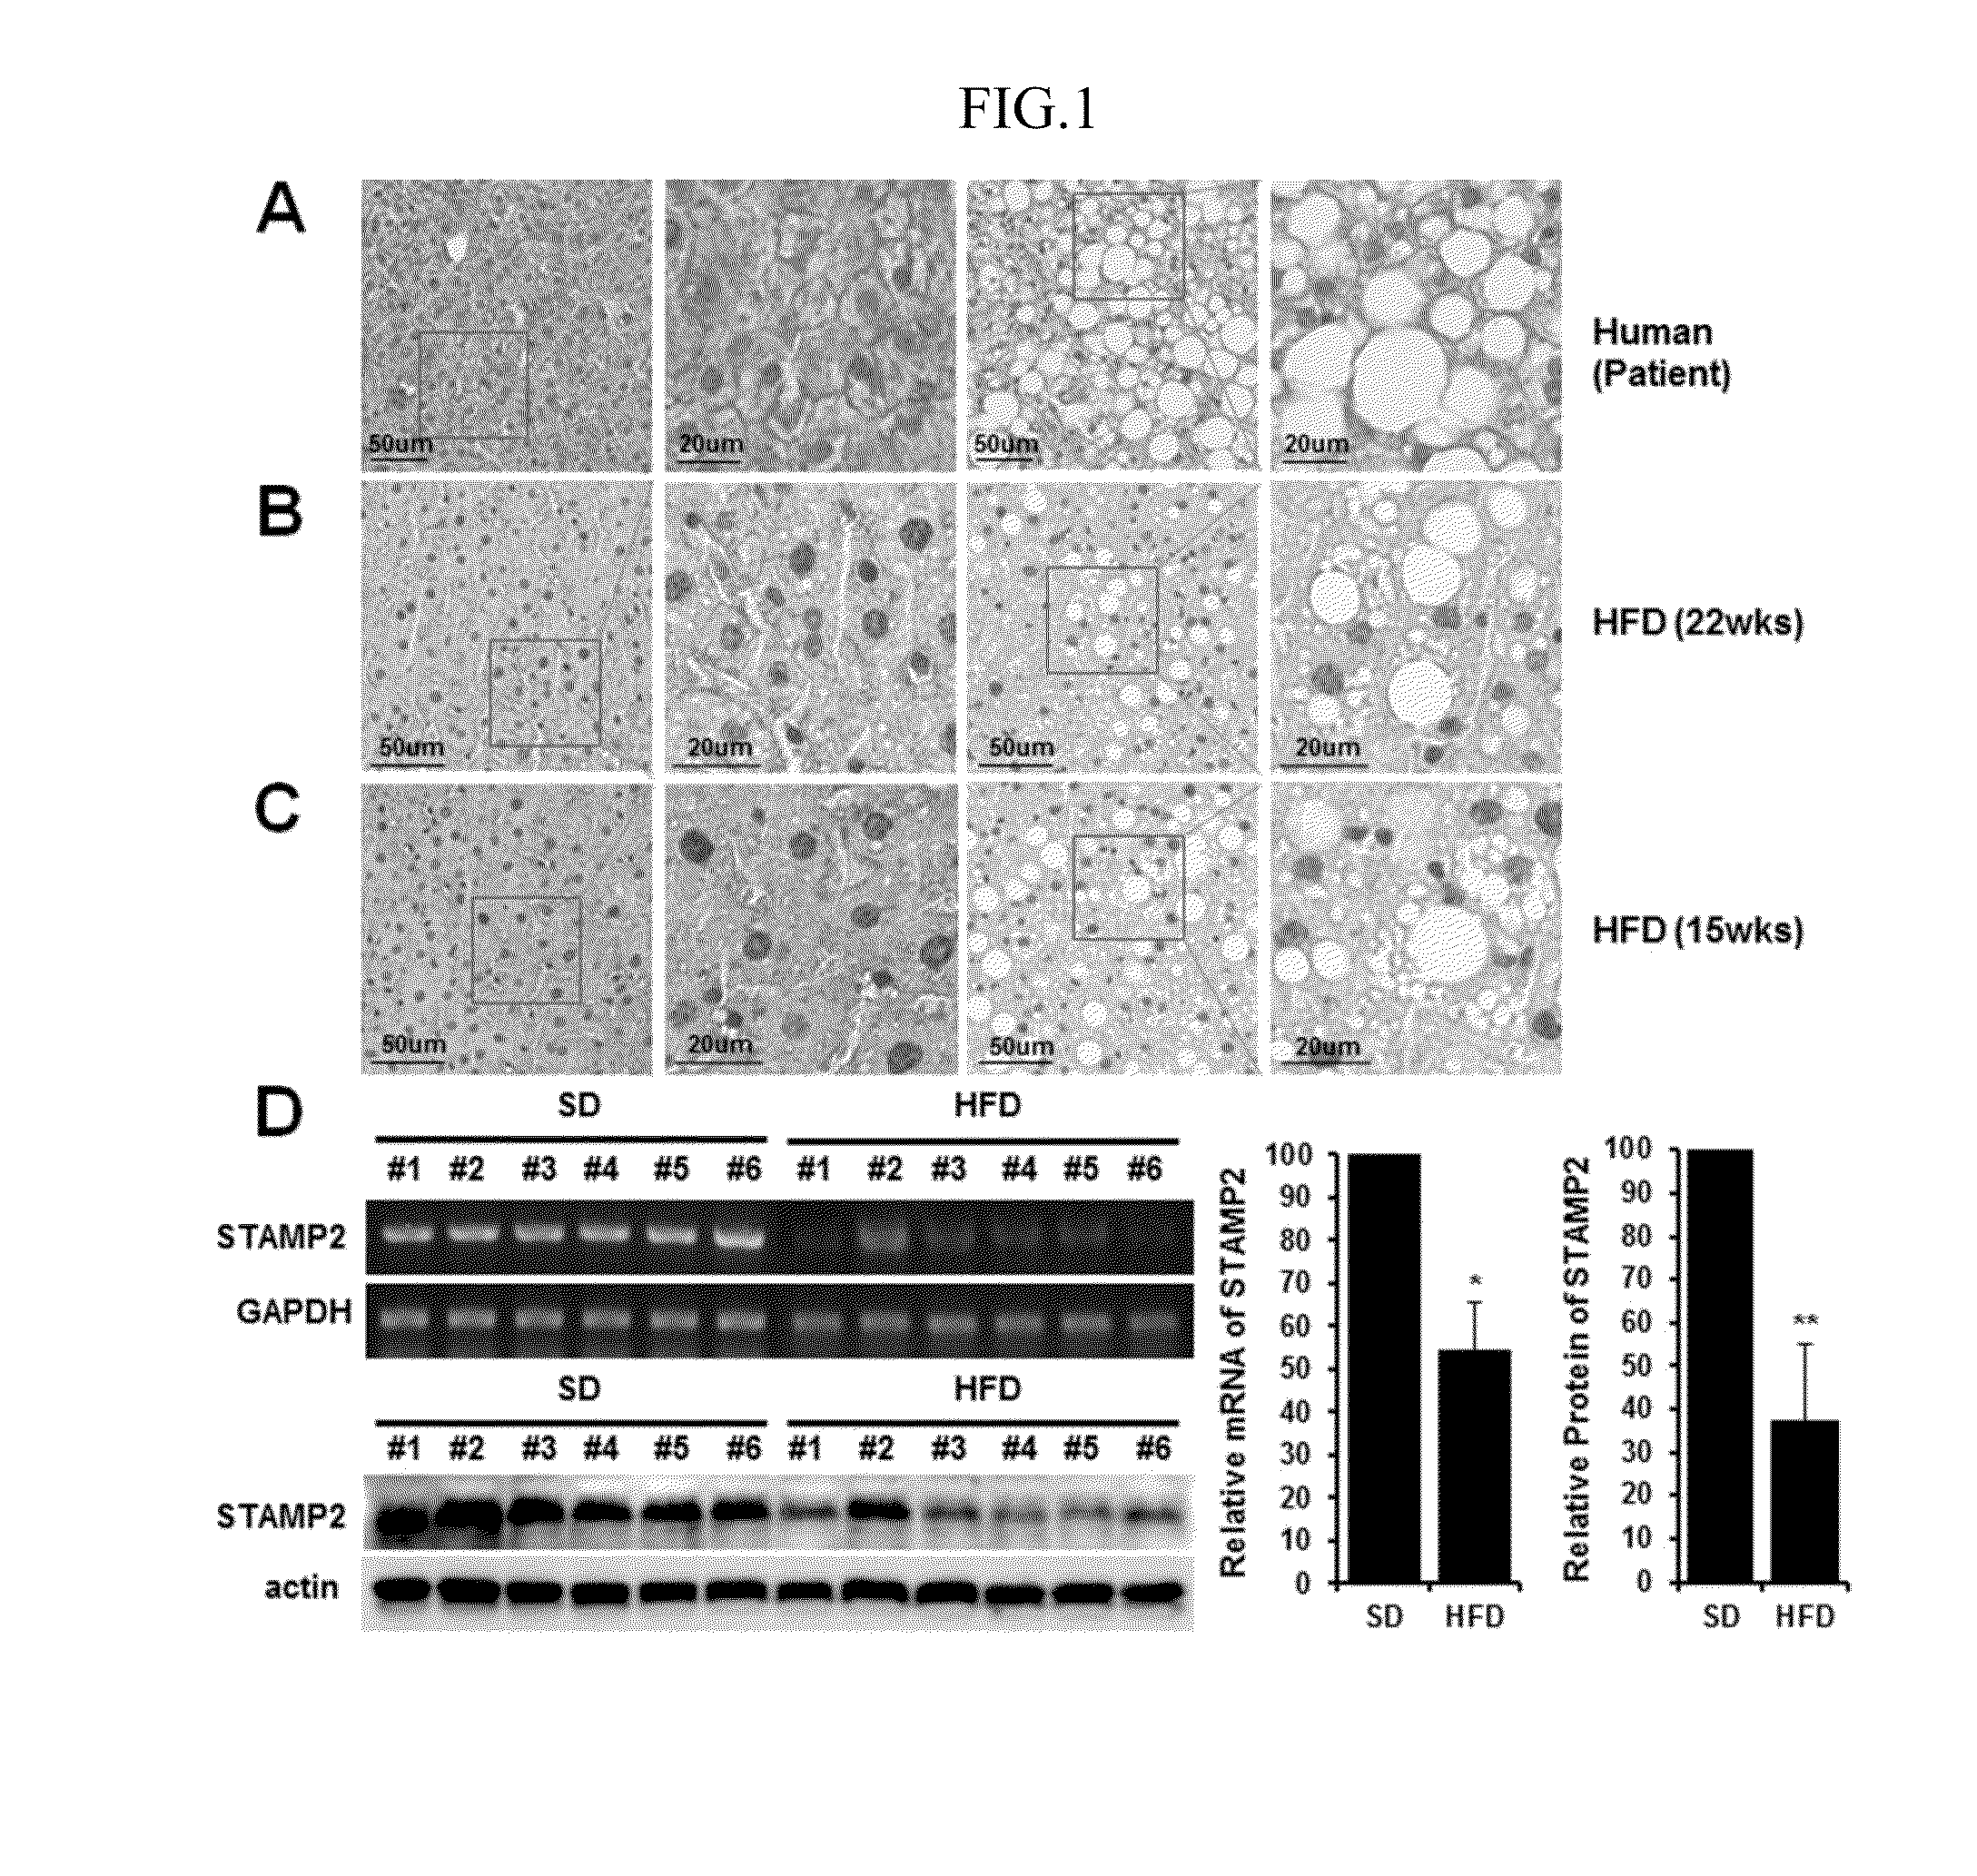 Method for treating or preventing nonalcoholic fatty liver disease